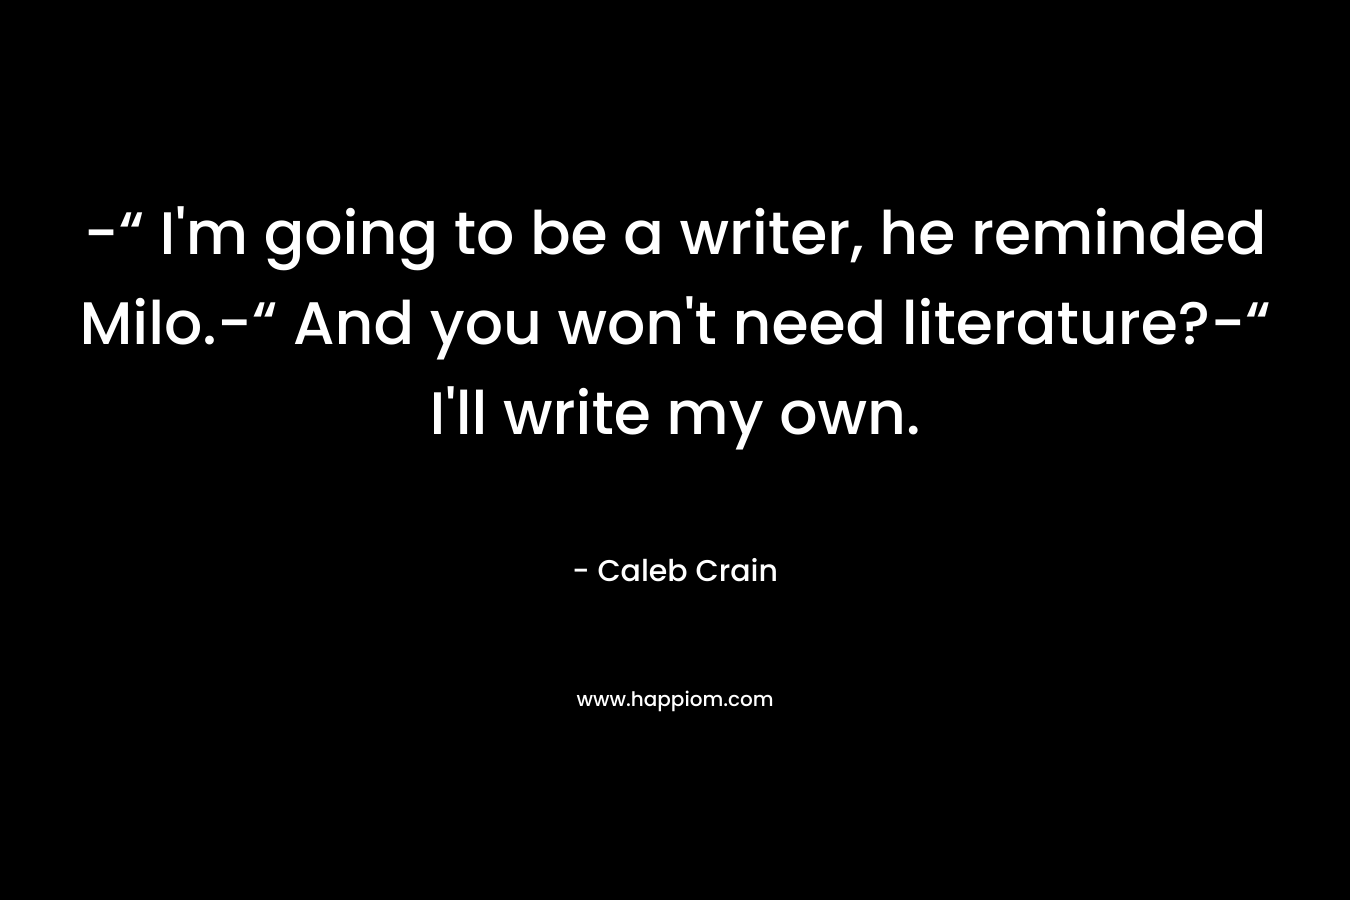 -“ I’m going to be a writer, he reminded Milo.-“ And you won’t need literature?-“ I’ll write my own. – Caleb Crain